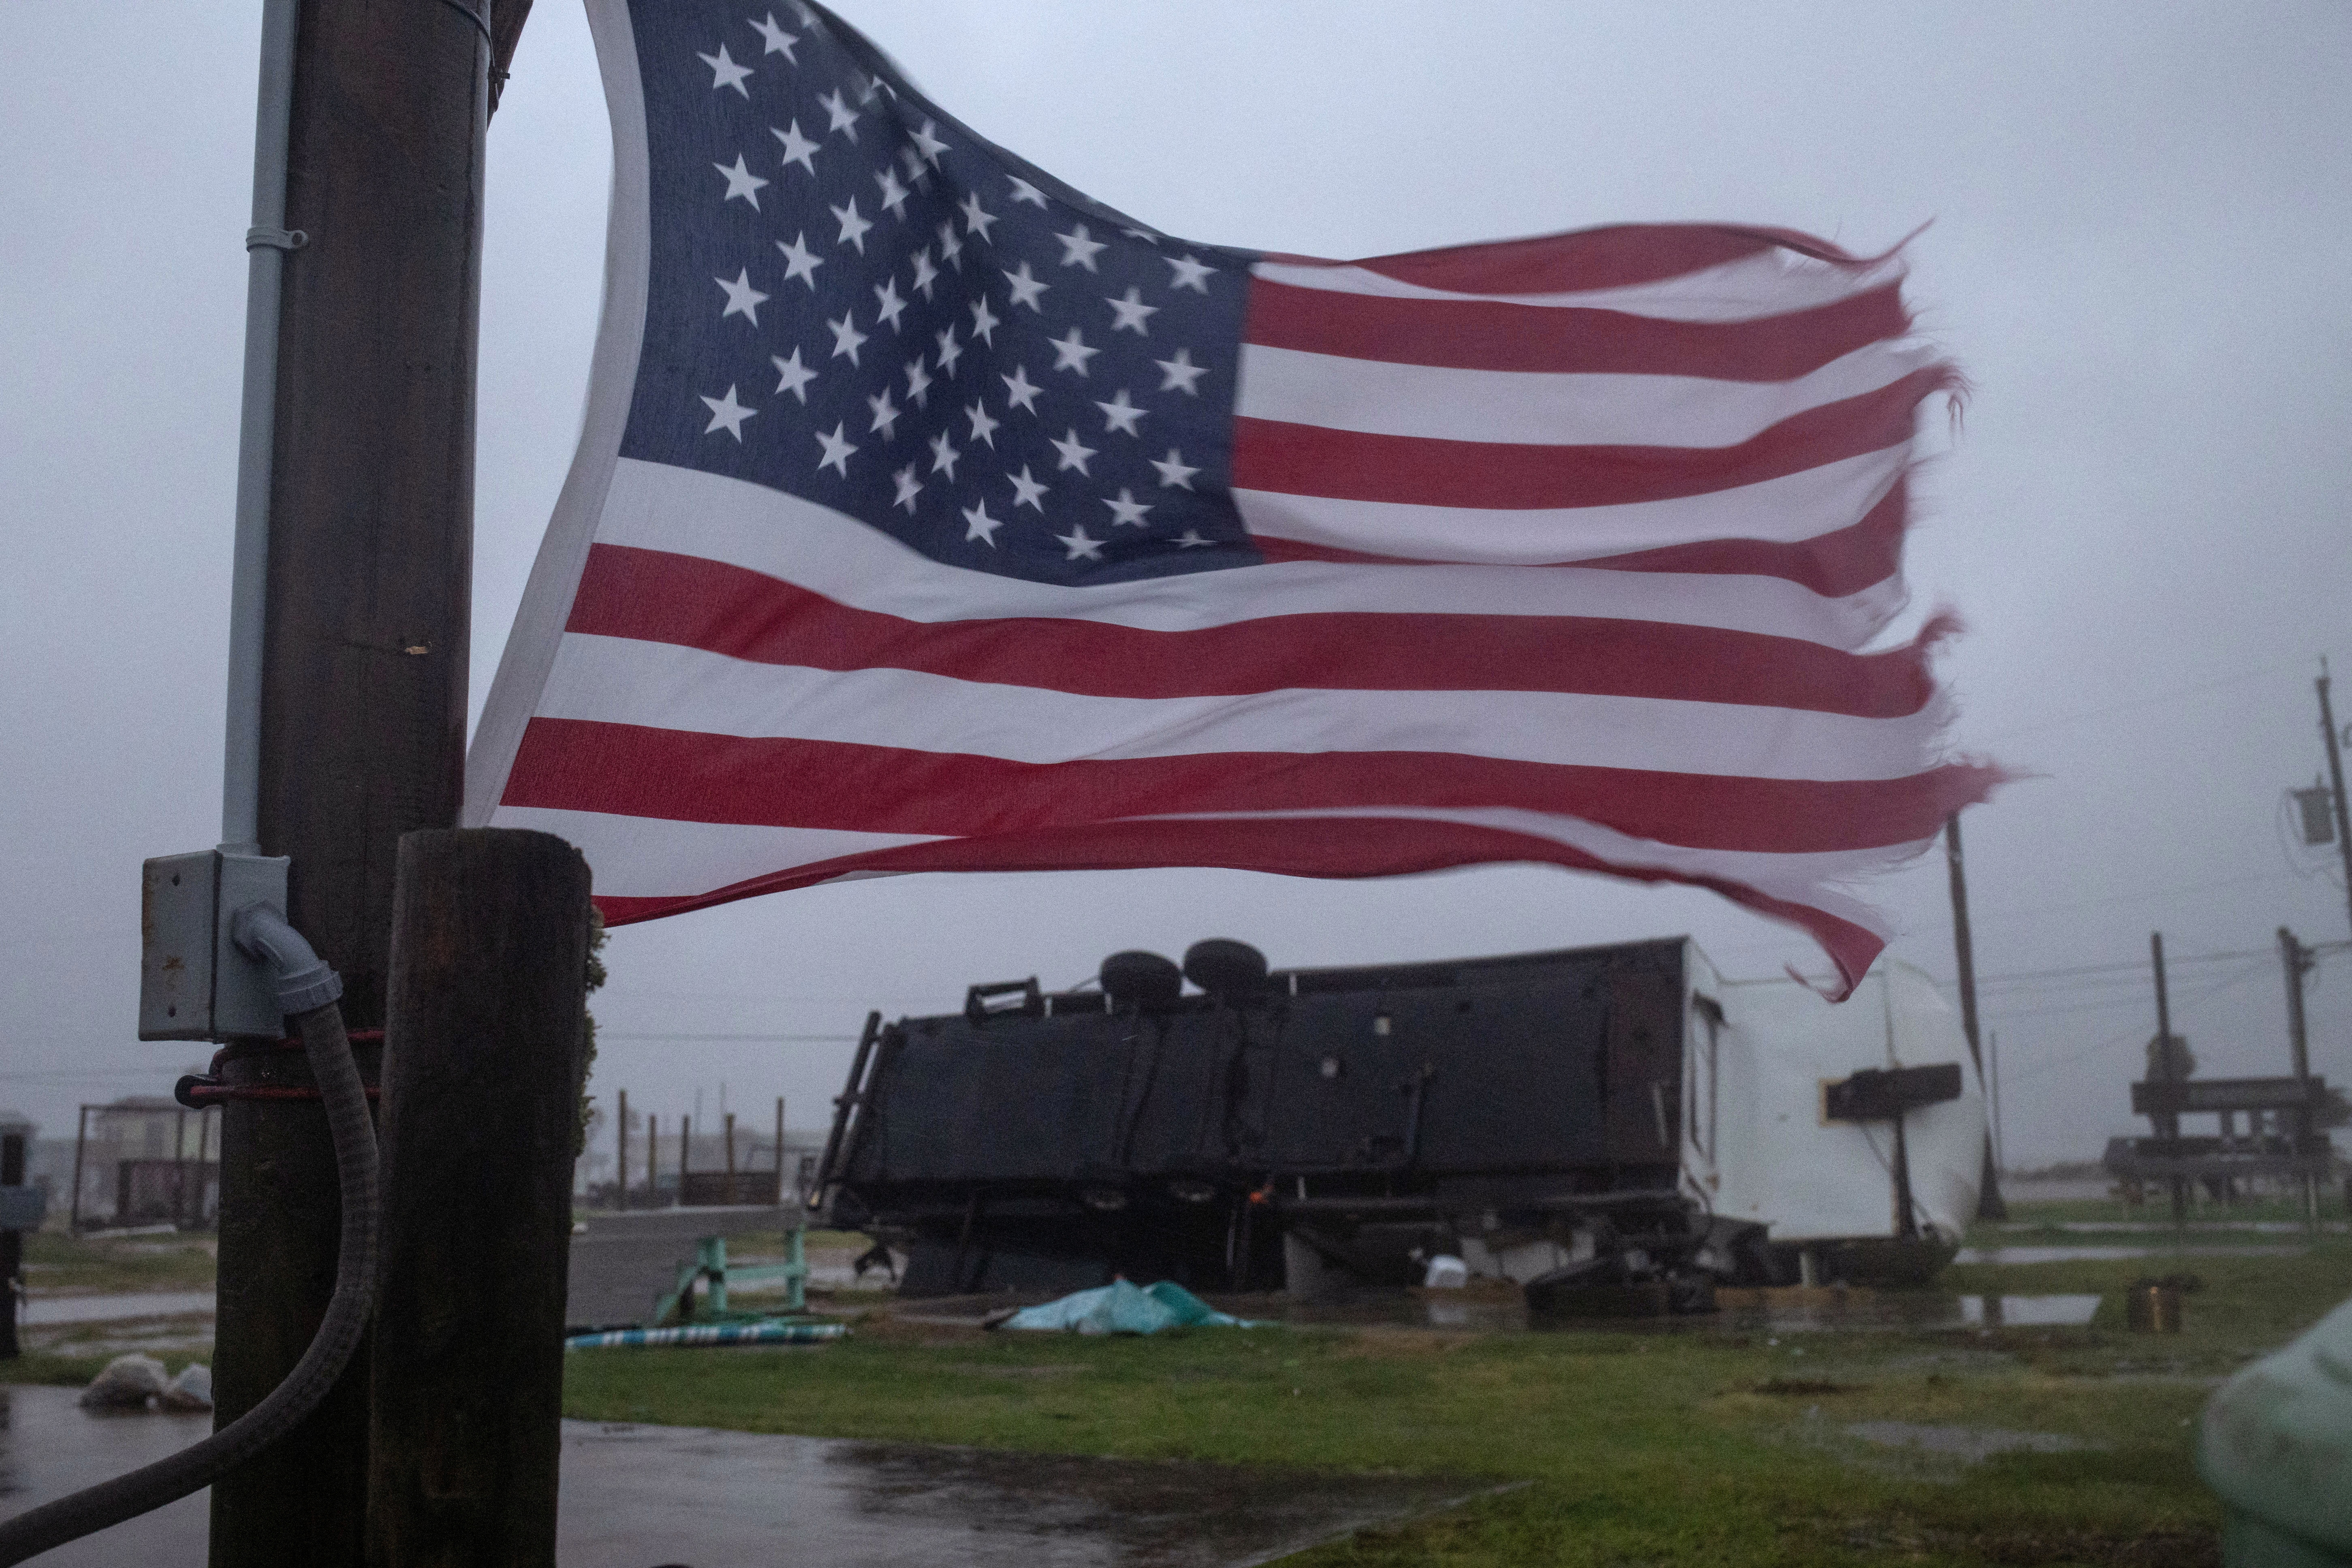 A trailer home is overturned by Hurricane Beryl winds in Surfside Beach, Texas